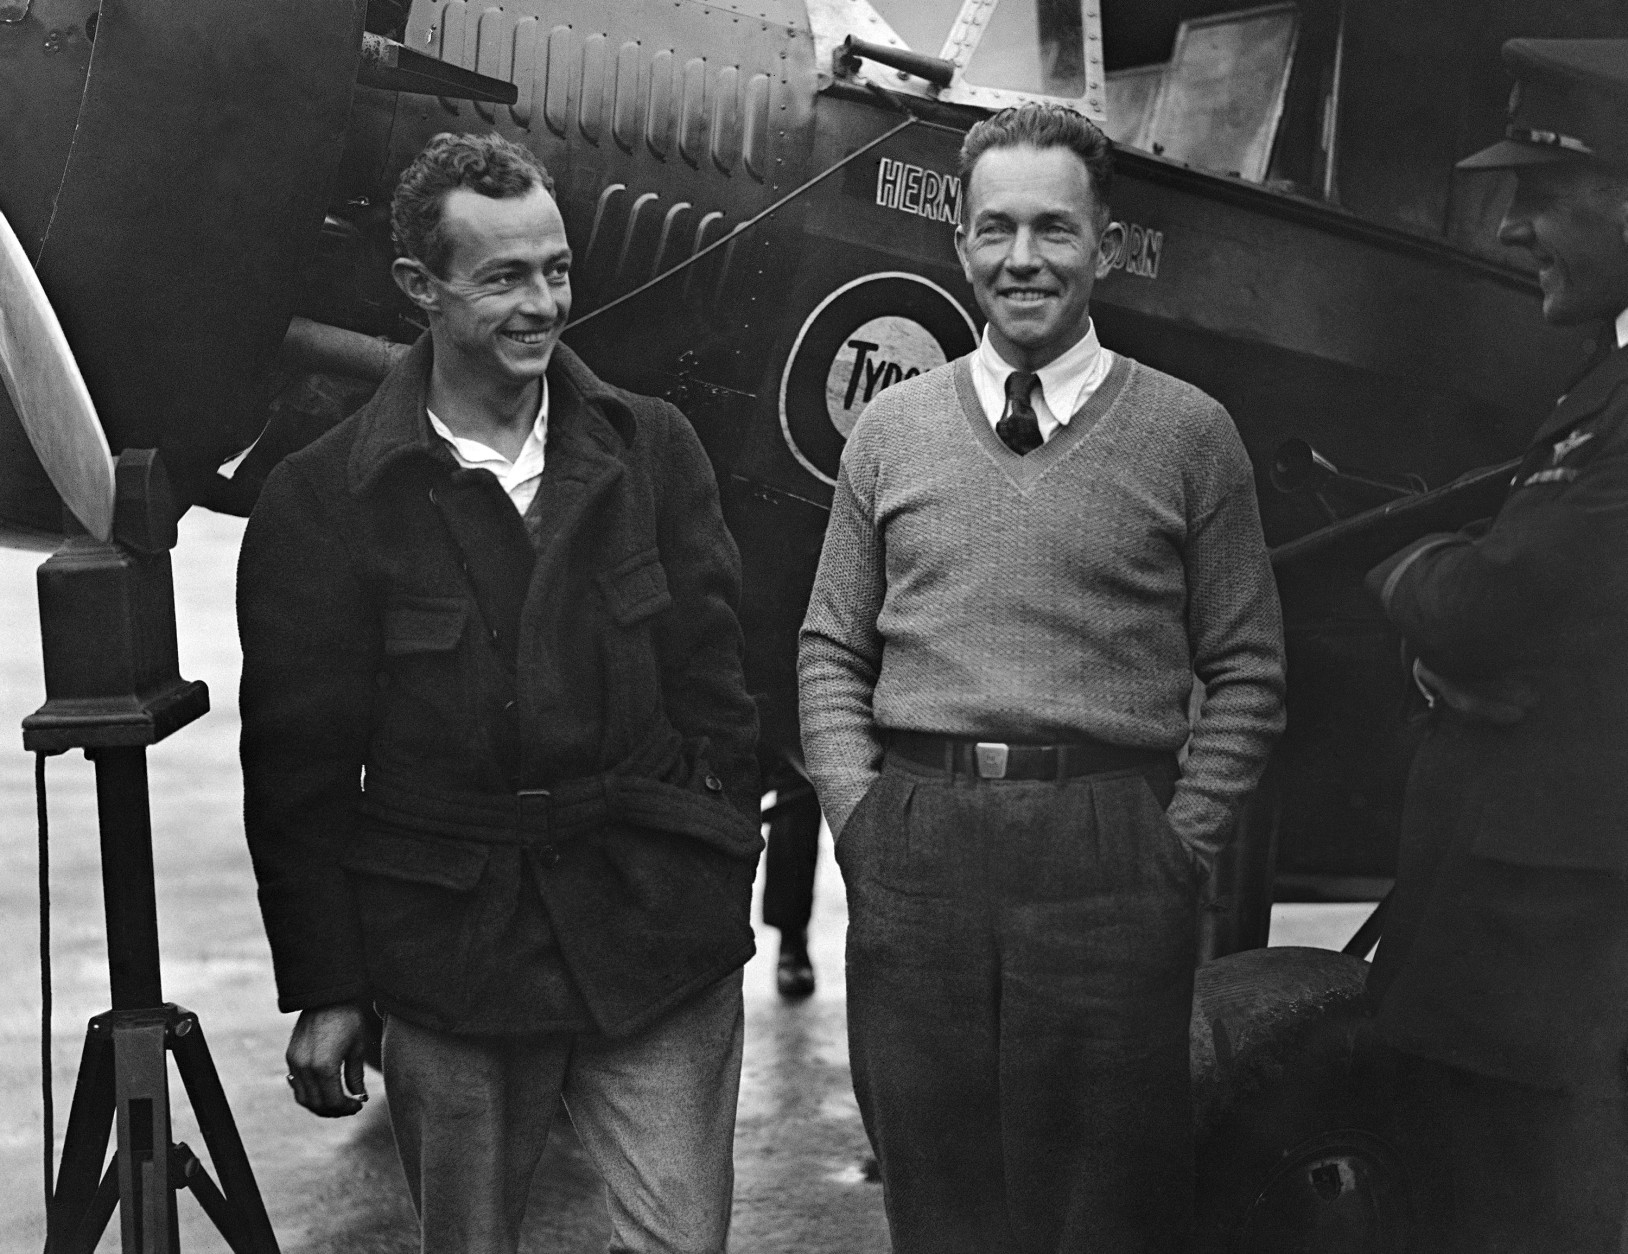 Pilots Hugh Herndon, left and Clyde Pangborn after arriving at Croydon Aerodrome in England on July 30, 1931. (AP Photo)